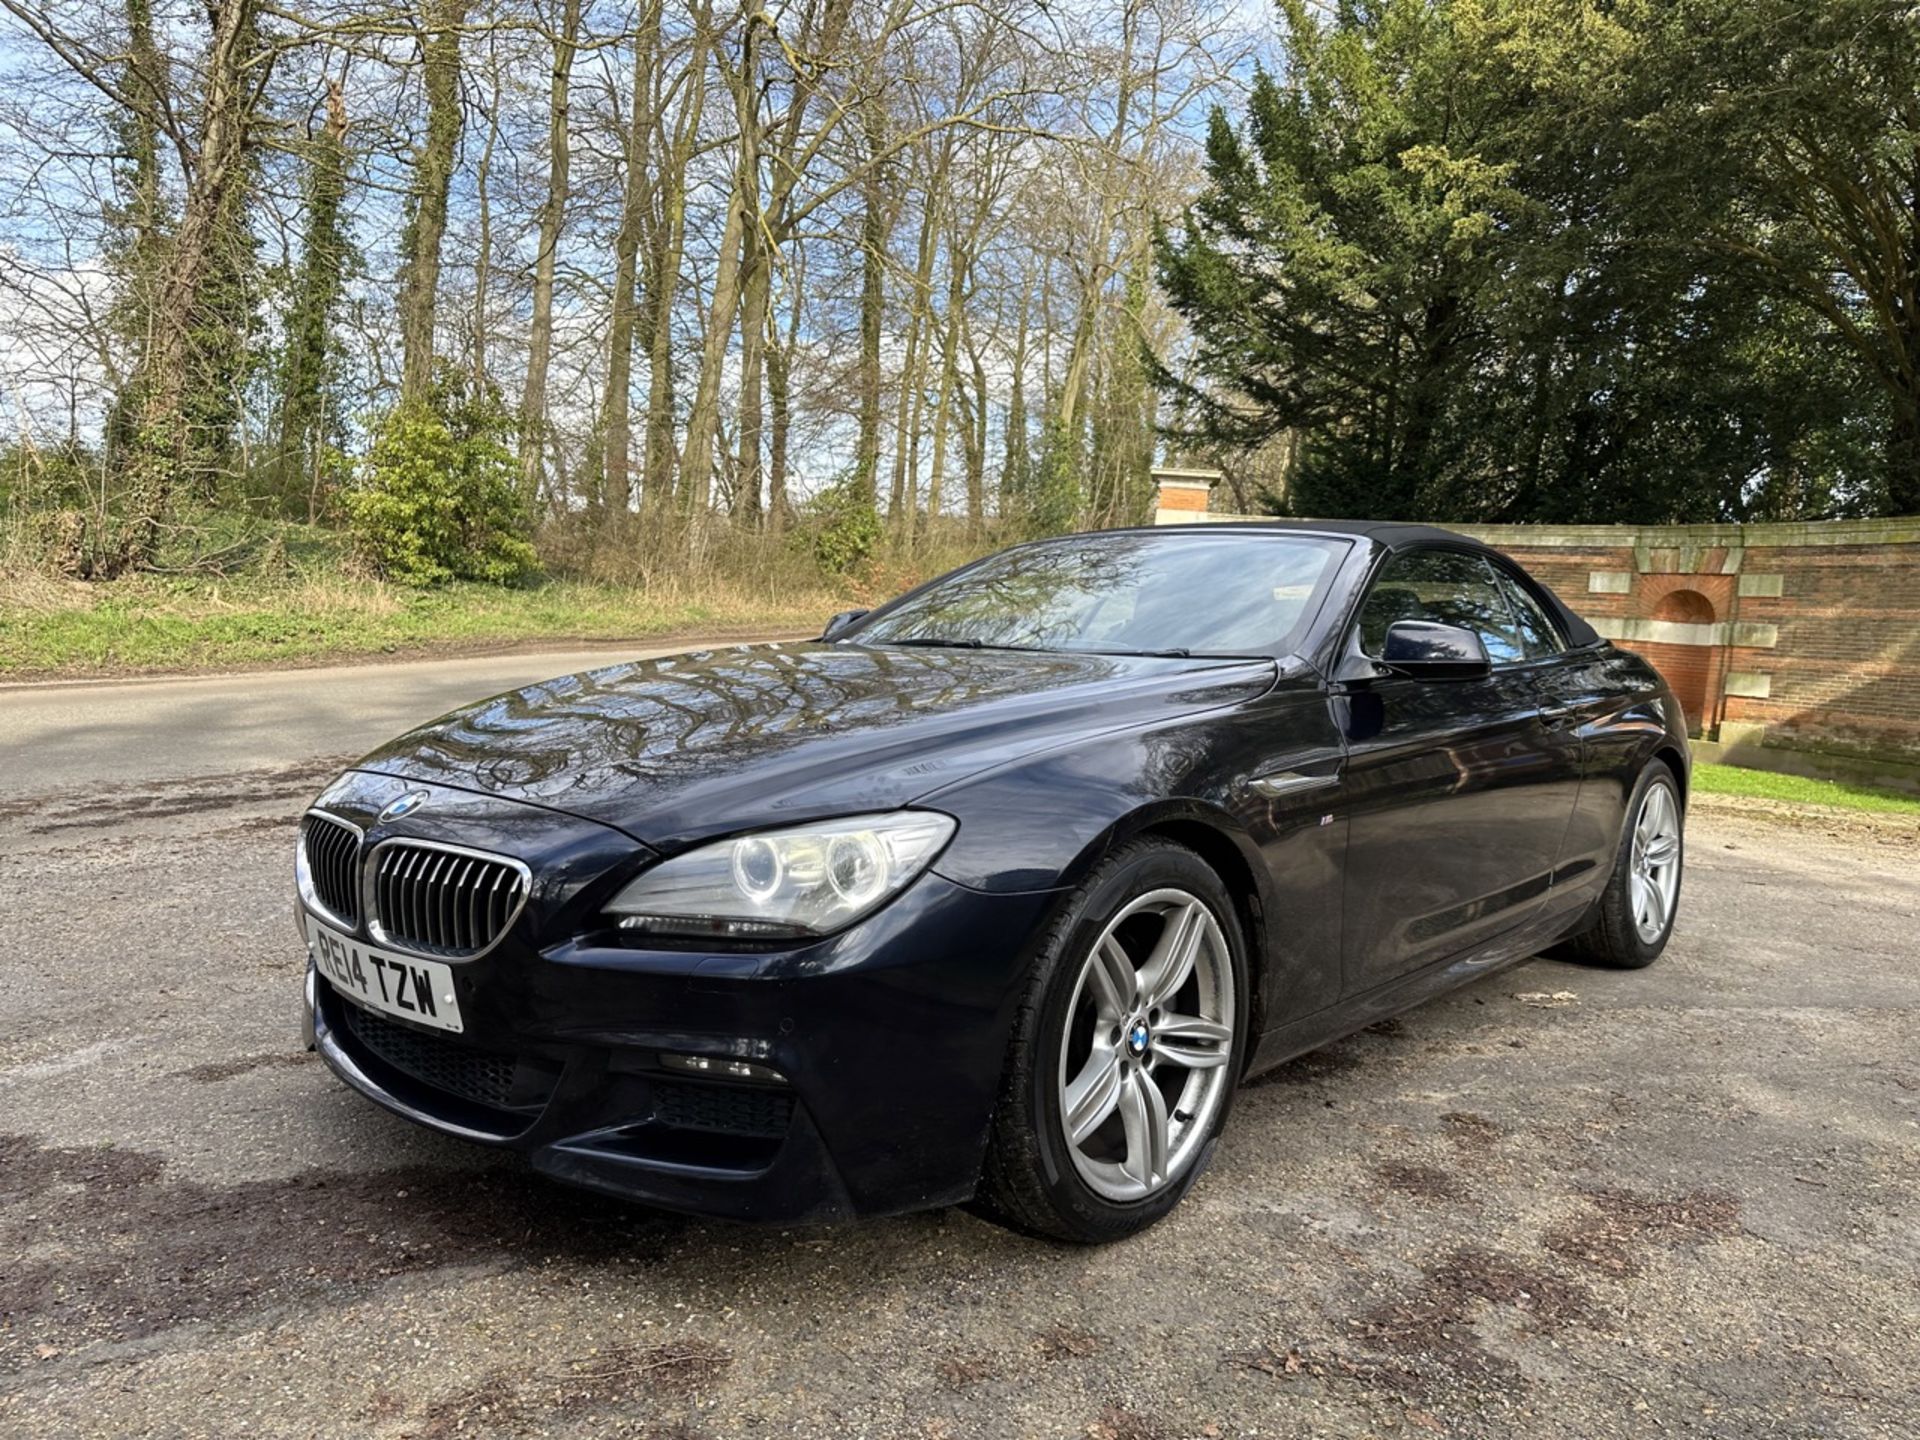 (RESERVE MET) BMW 6 SERIES 640d (M SPORT) Ultimate Summer Car - AUTOMATIC - Convertible - 2014 - Image 13 of 22